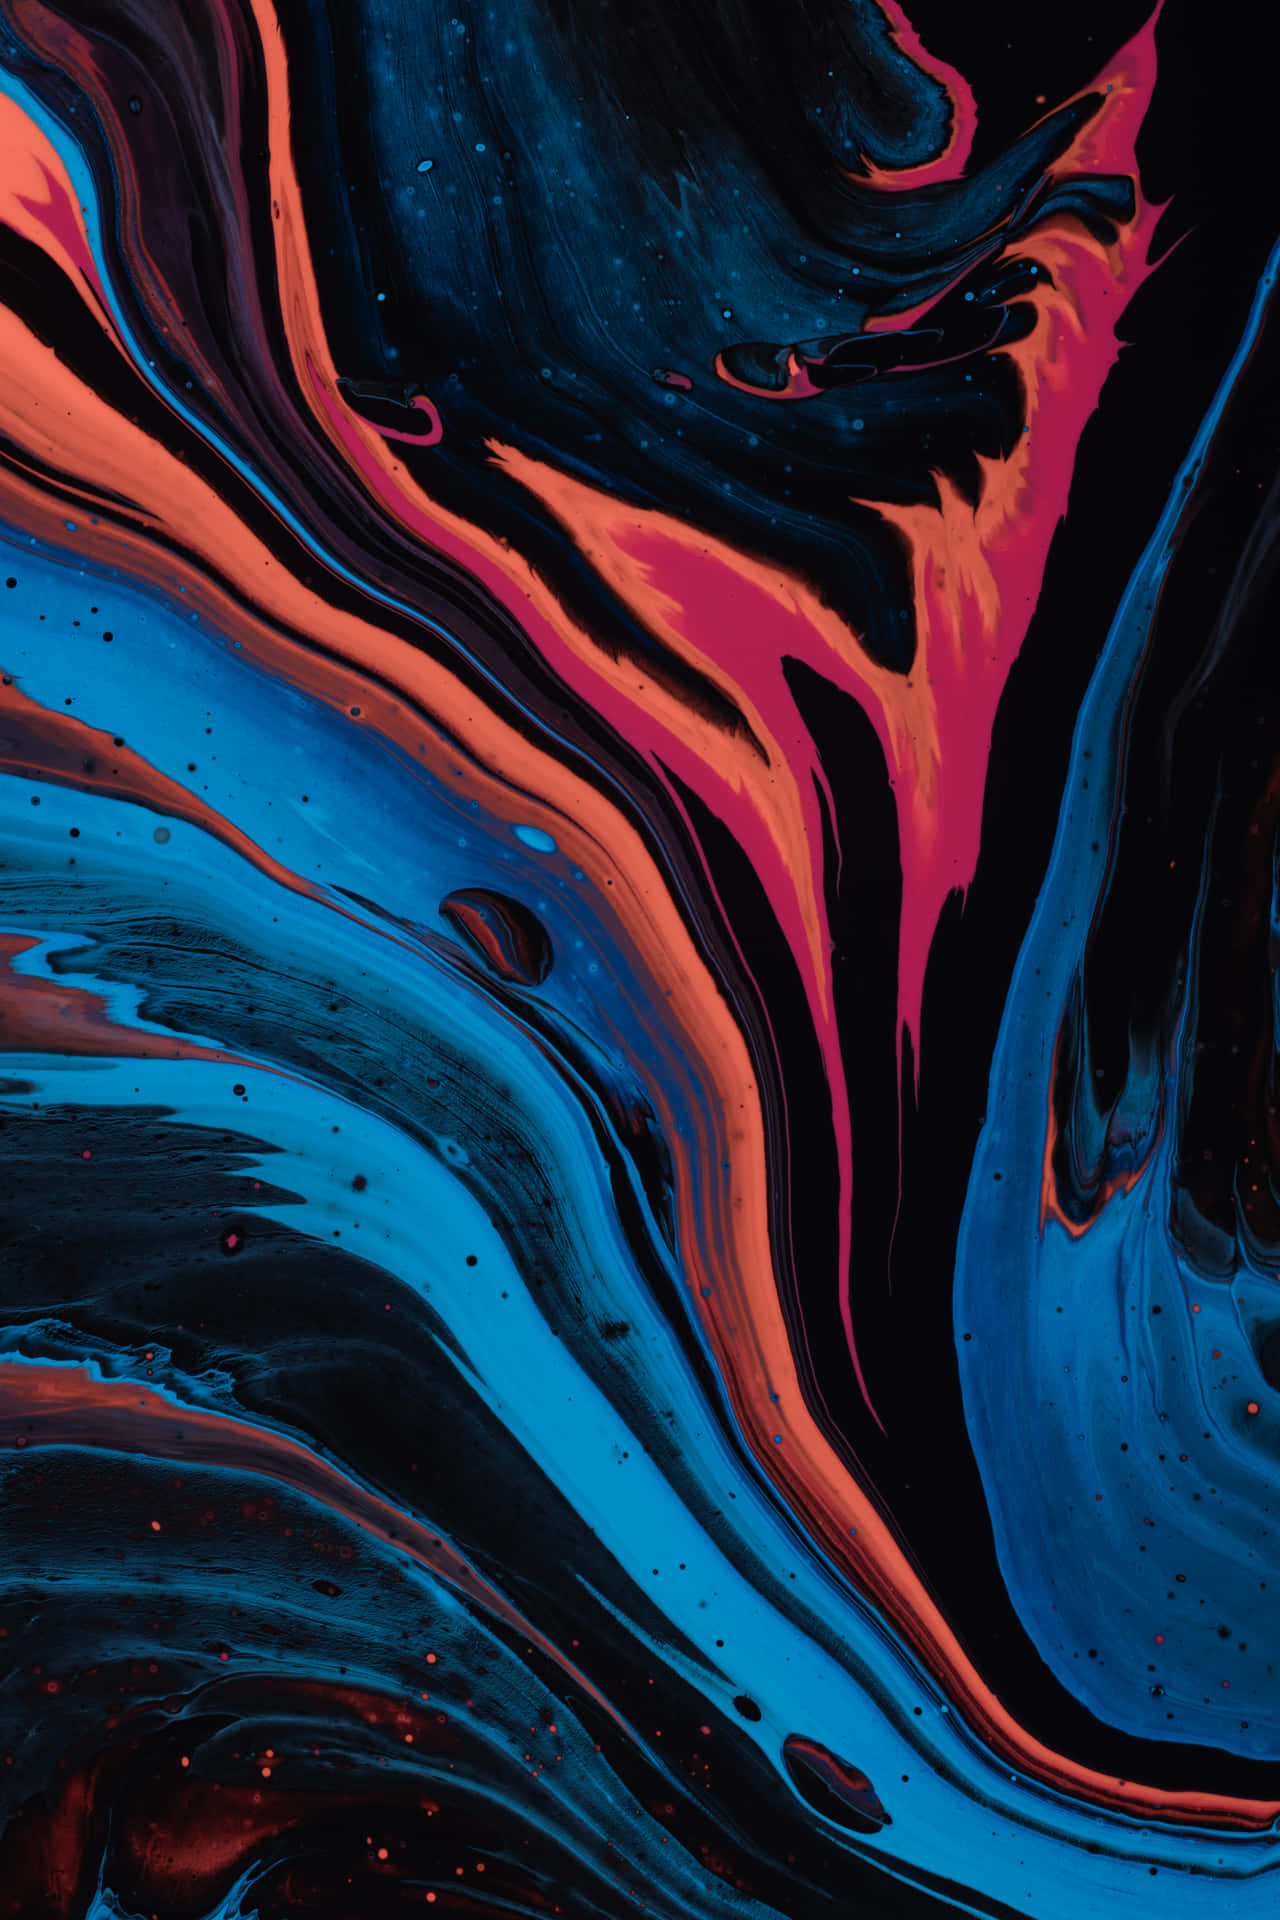 Enjoy The Beauty Of Colorful Abstract Art Wallpaper